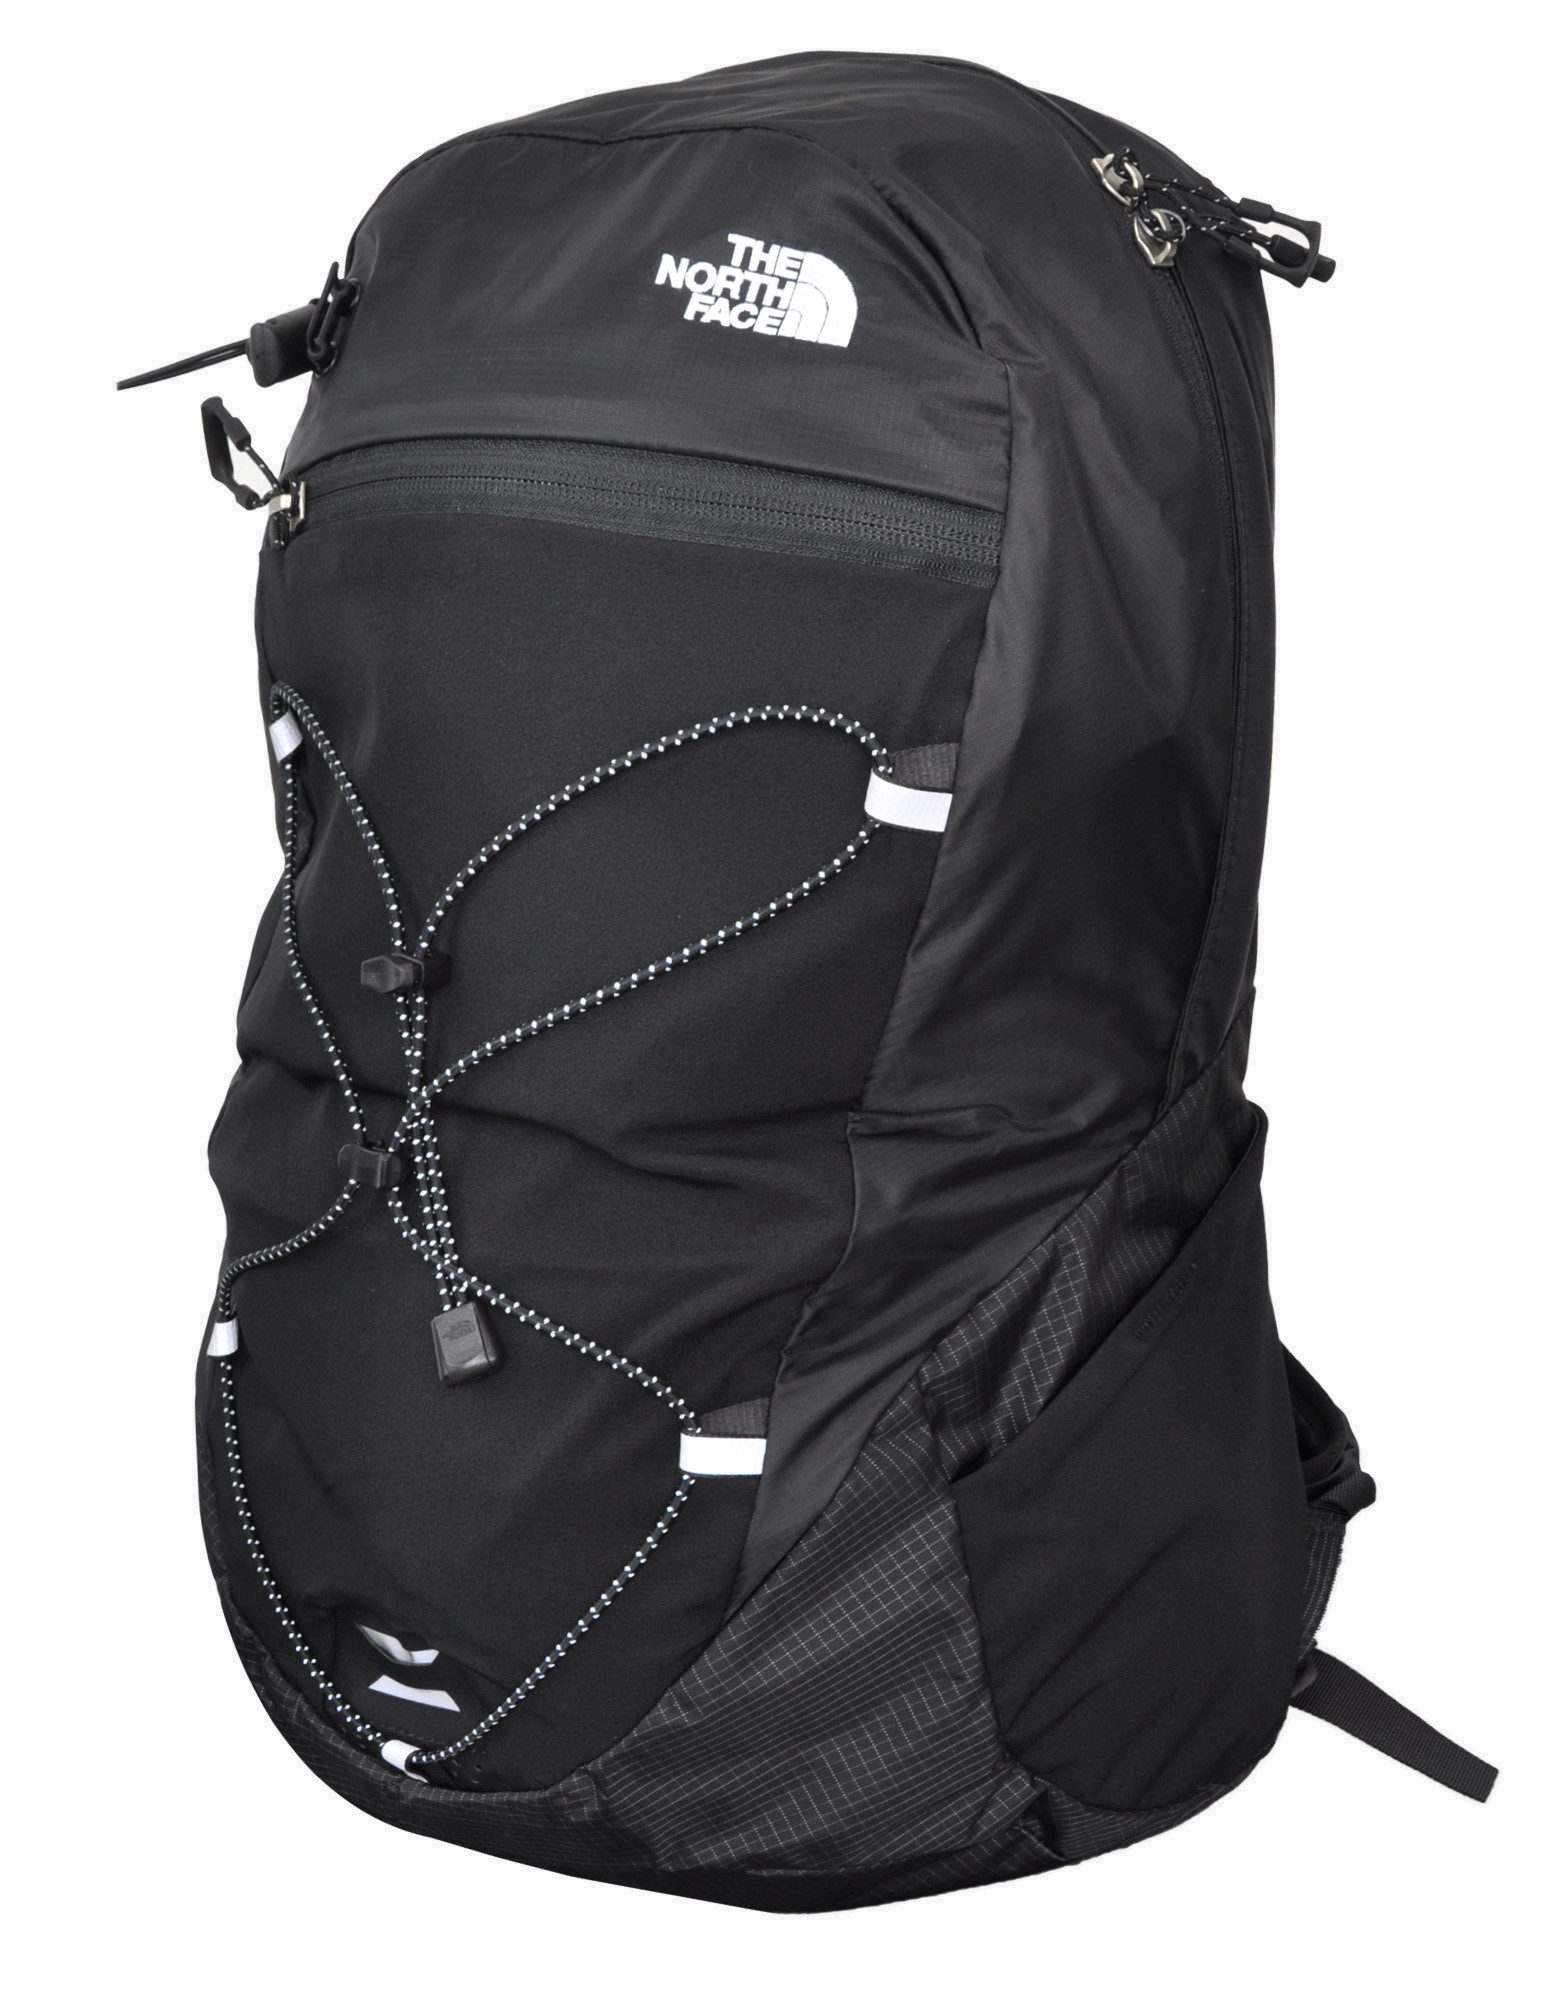 Angstrom 20L Backpack The north face 